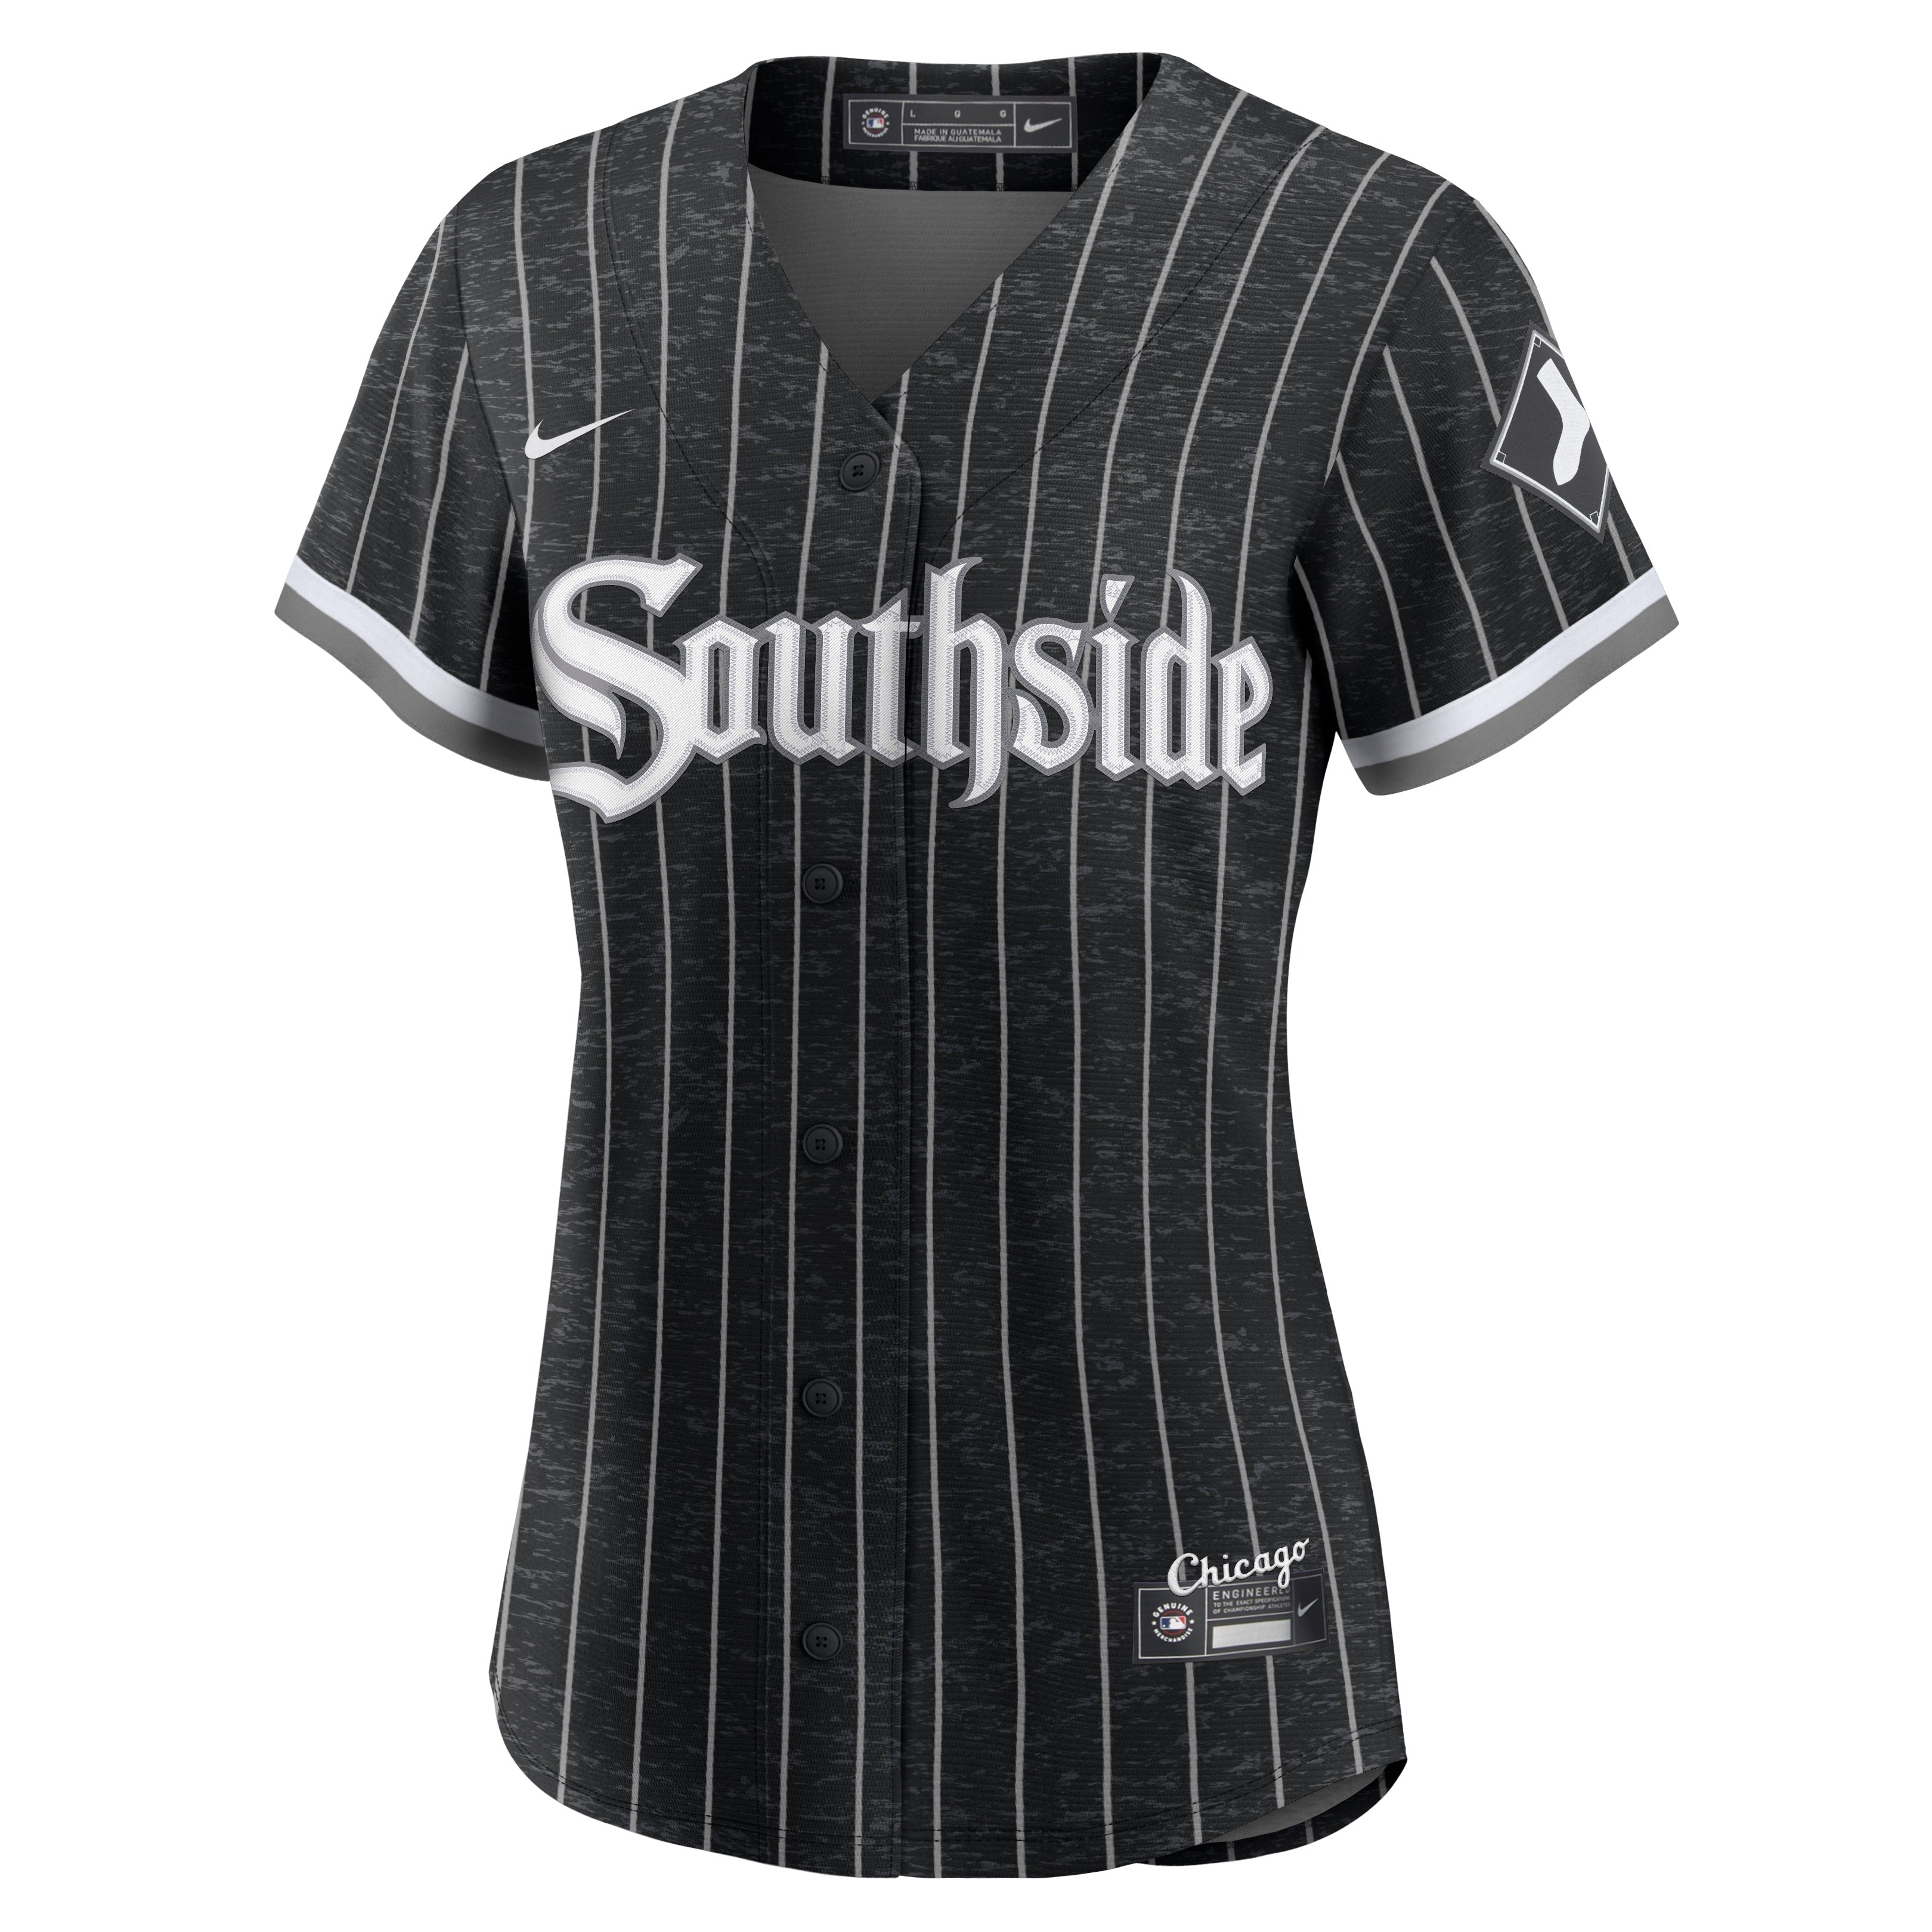 buy officia new white sox jersey 2021 ,Chicago White Sox Gifts